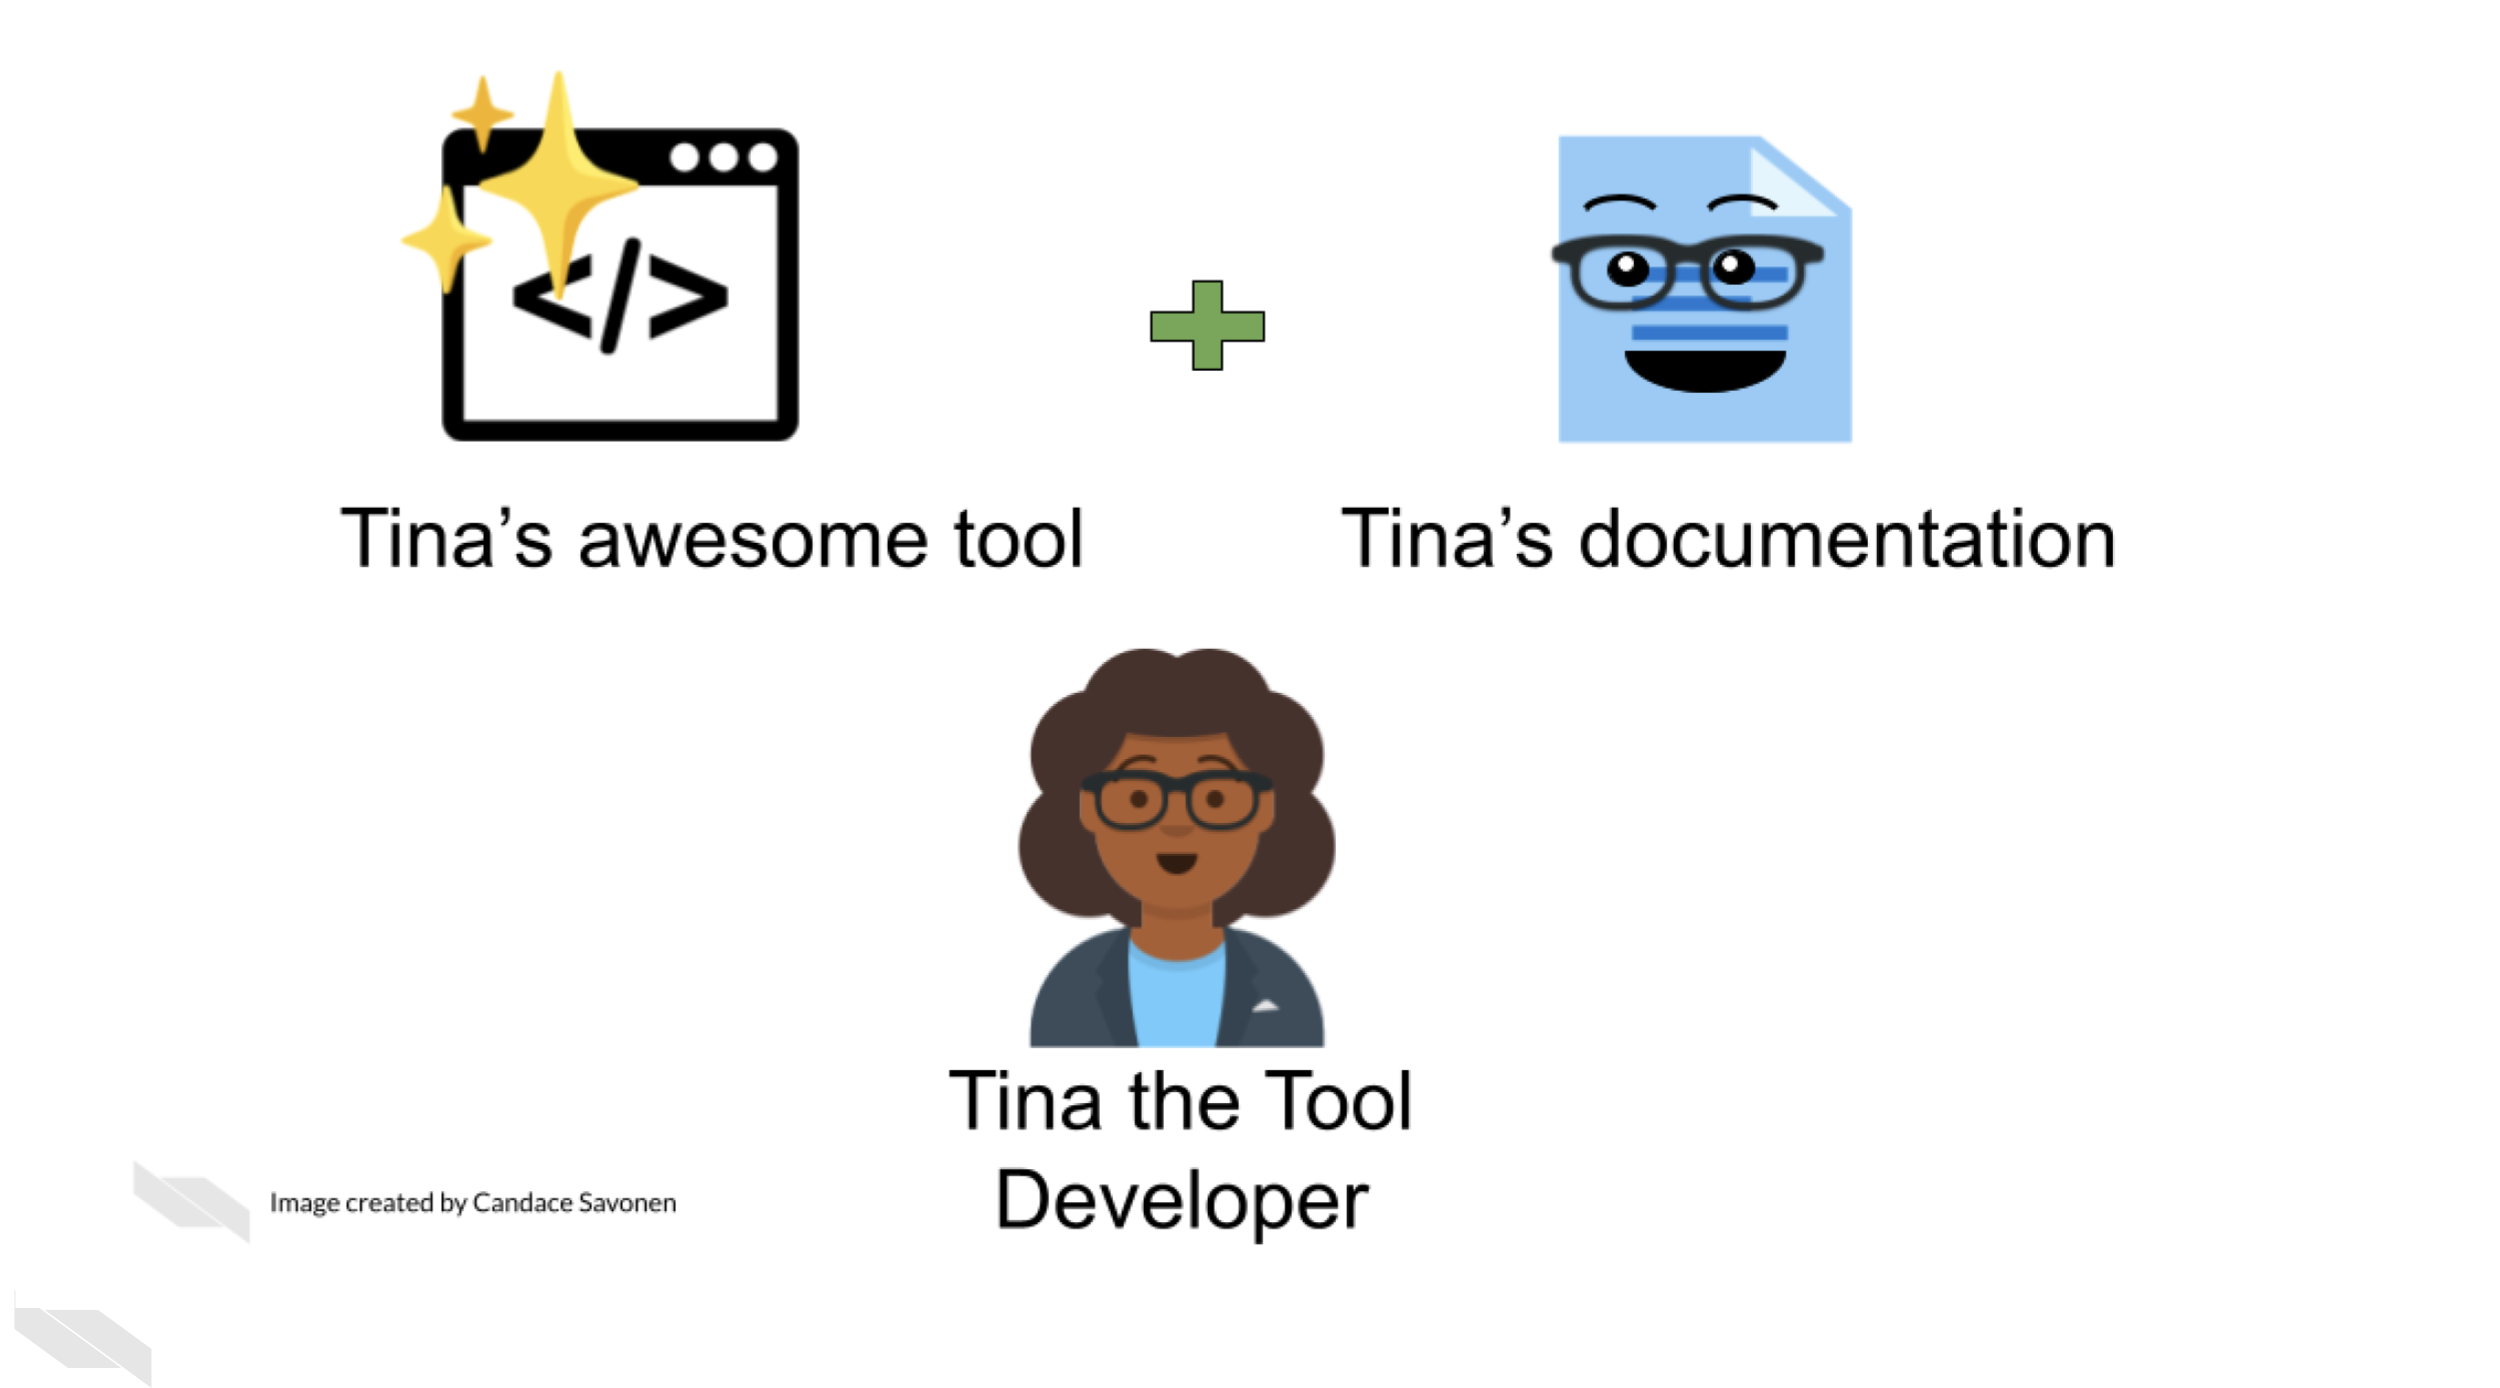 In this next scenario, Tina the Tool Developer has skillfully created documentation that goes along with her awesome tool. The documentation is a personified document icon.